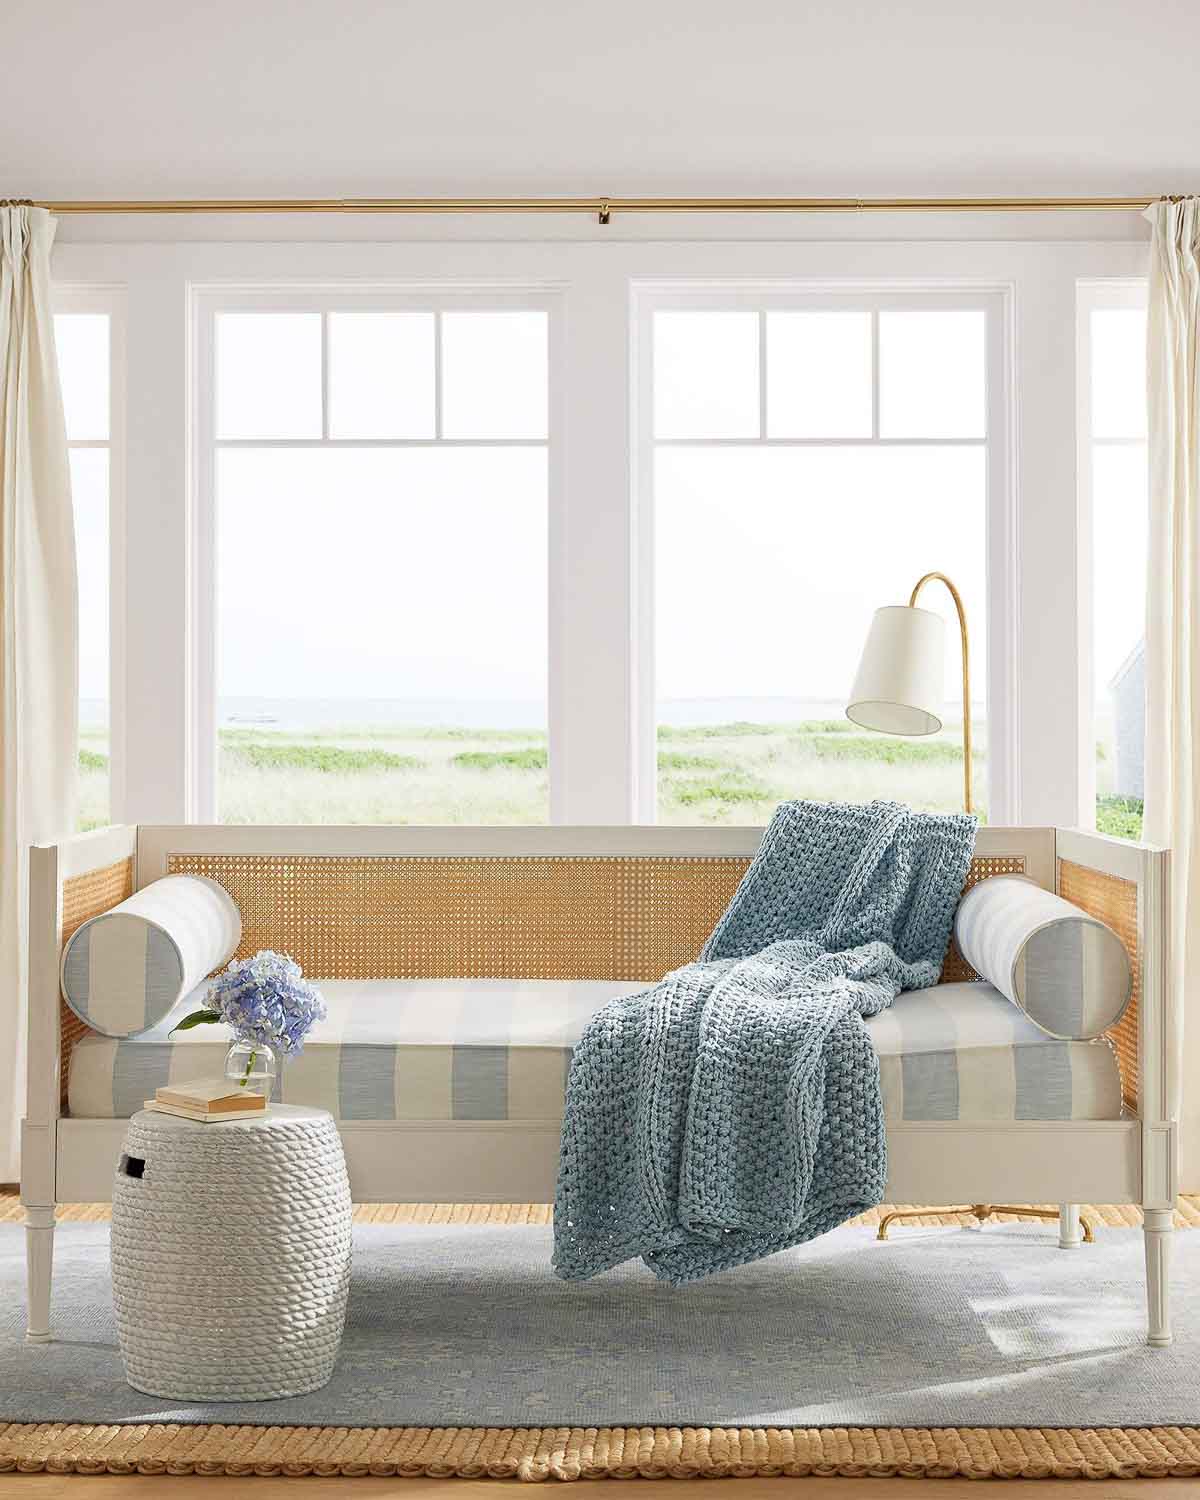 Stylish daybed used in a reading nook with a floor lamp and side table